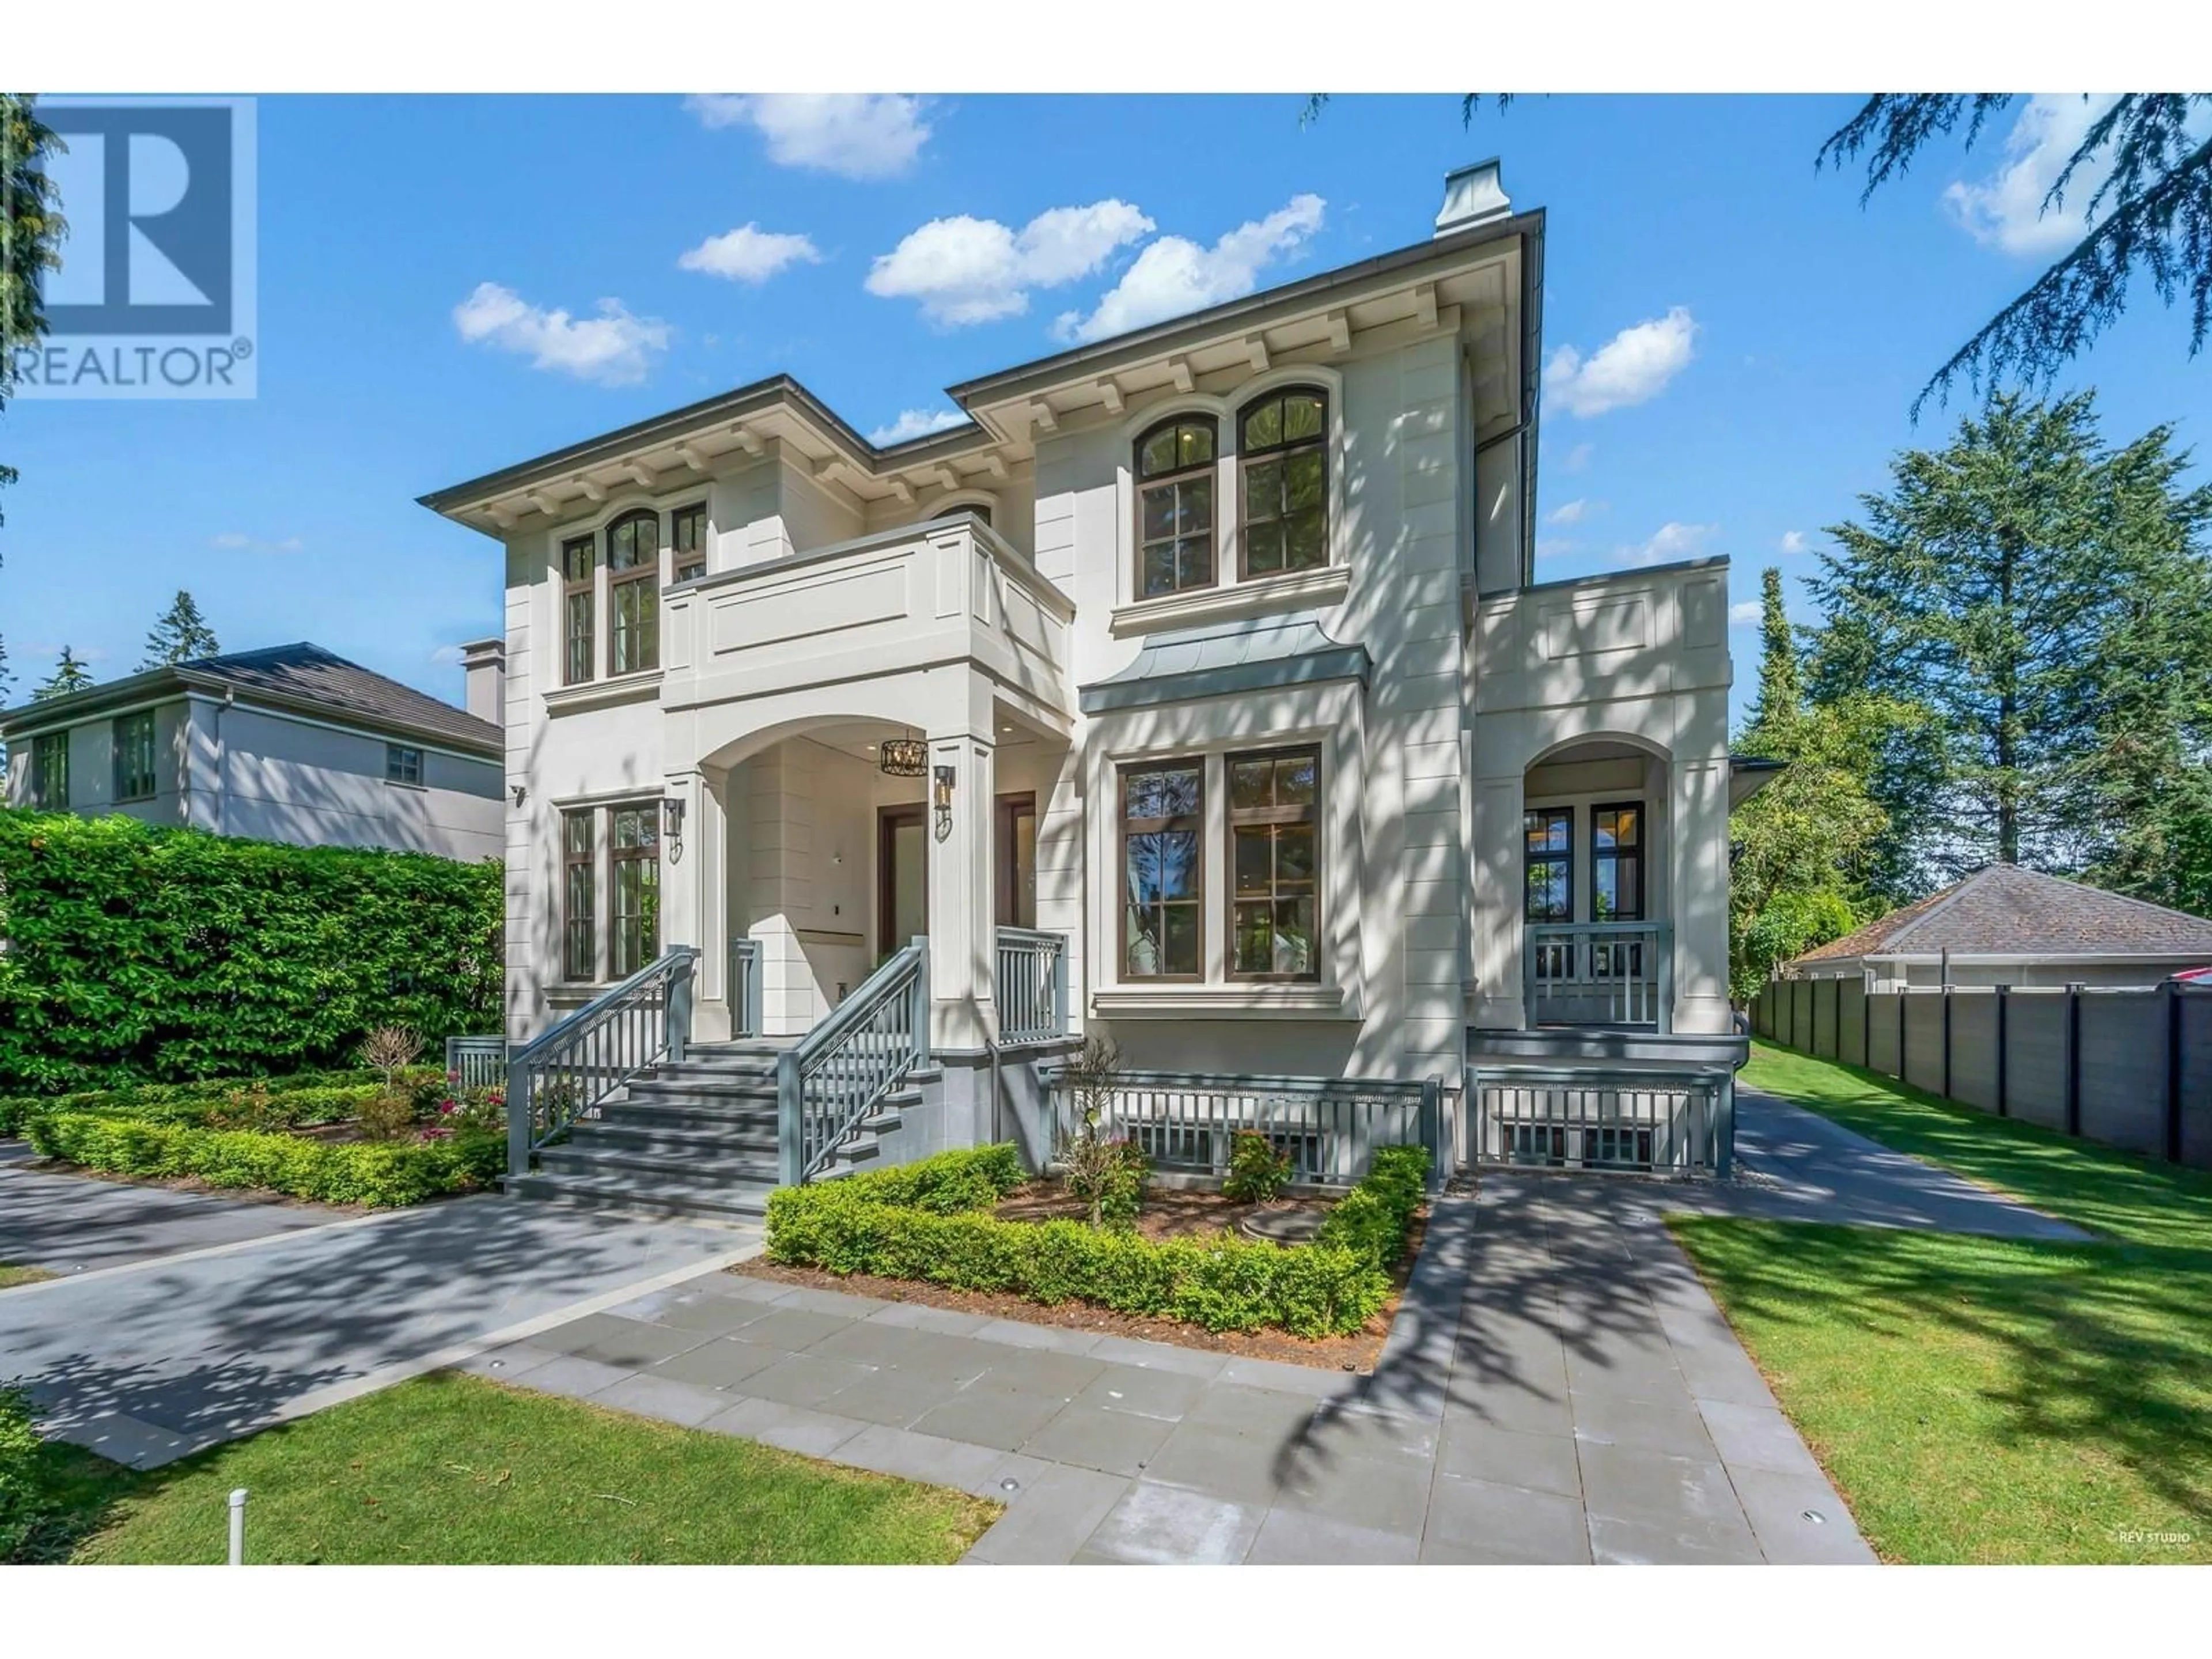 Home with brick exterior material for 6238 CHURCHILL STREET, Vancouver British Columbia V6M3H7